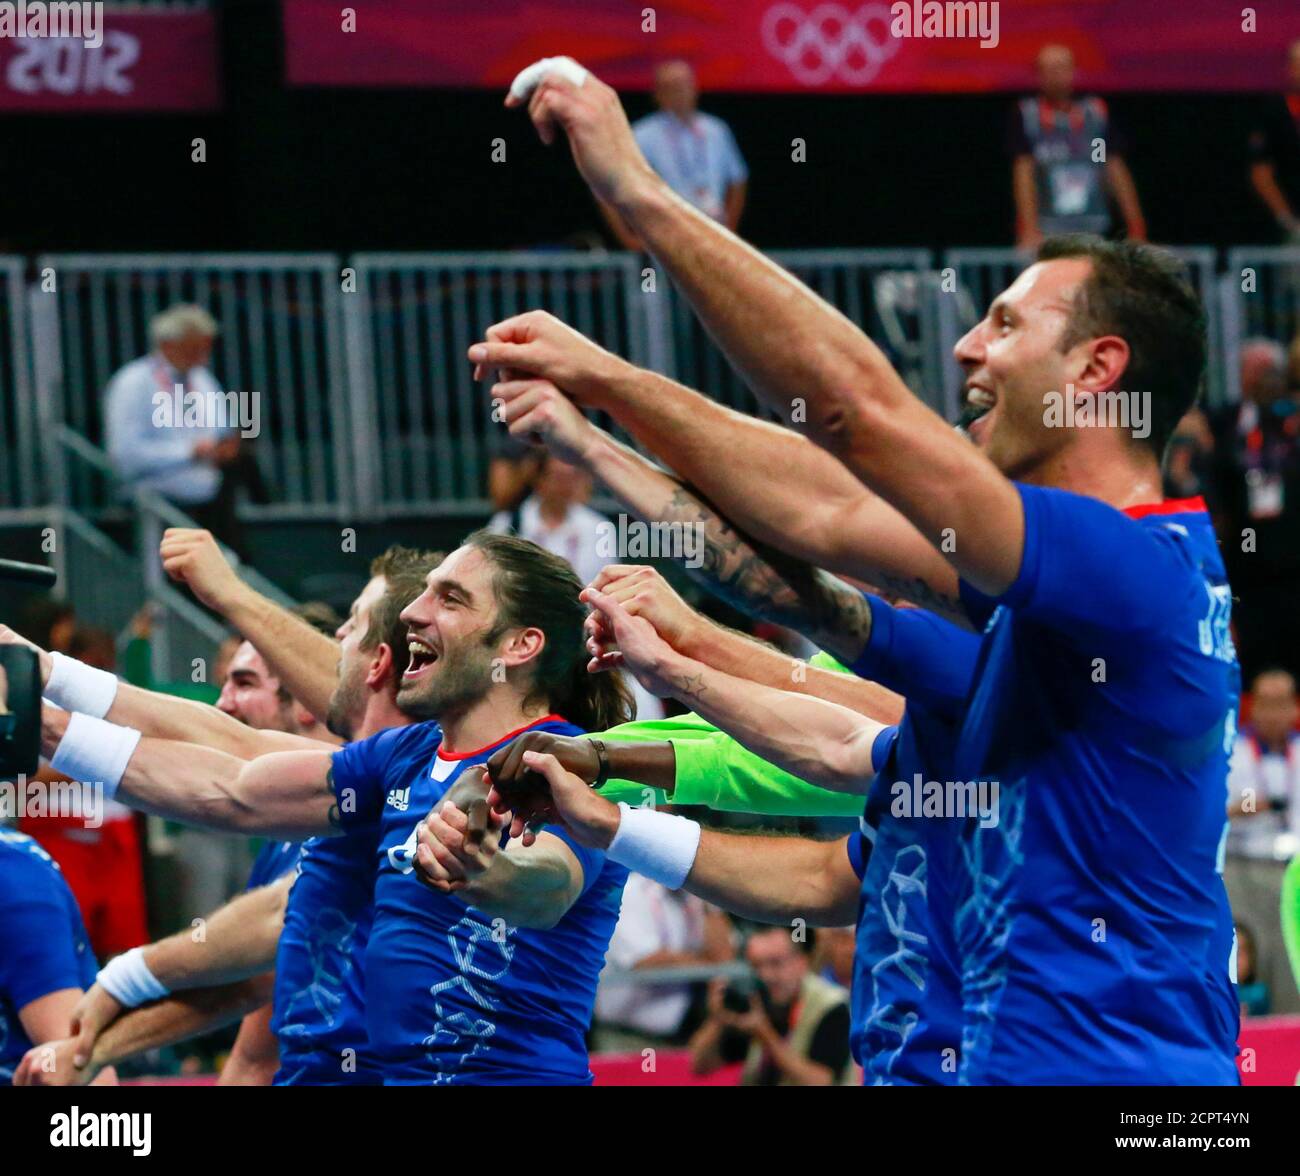 France's team players celebrate after defeating Croatia in their men's semi-final match at the Basketball Arena during the London 2012 Olympic Games August 10, 2012.            REUTERS/Adrees Latif (BRITAIN  - Tags: SPORT HANDBALL OLYMPICS) Stock Photo